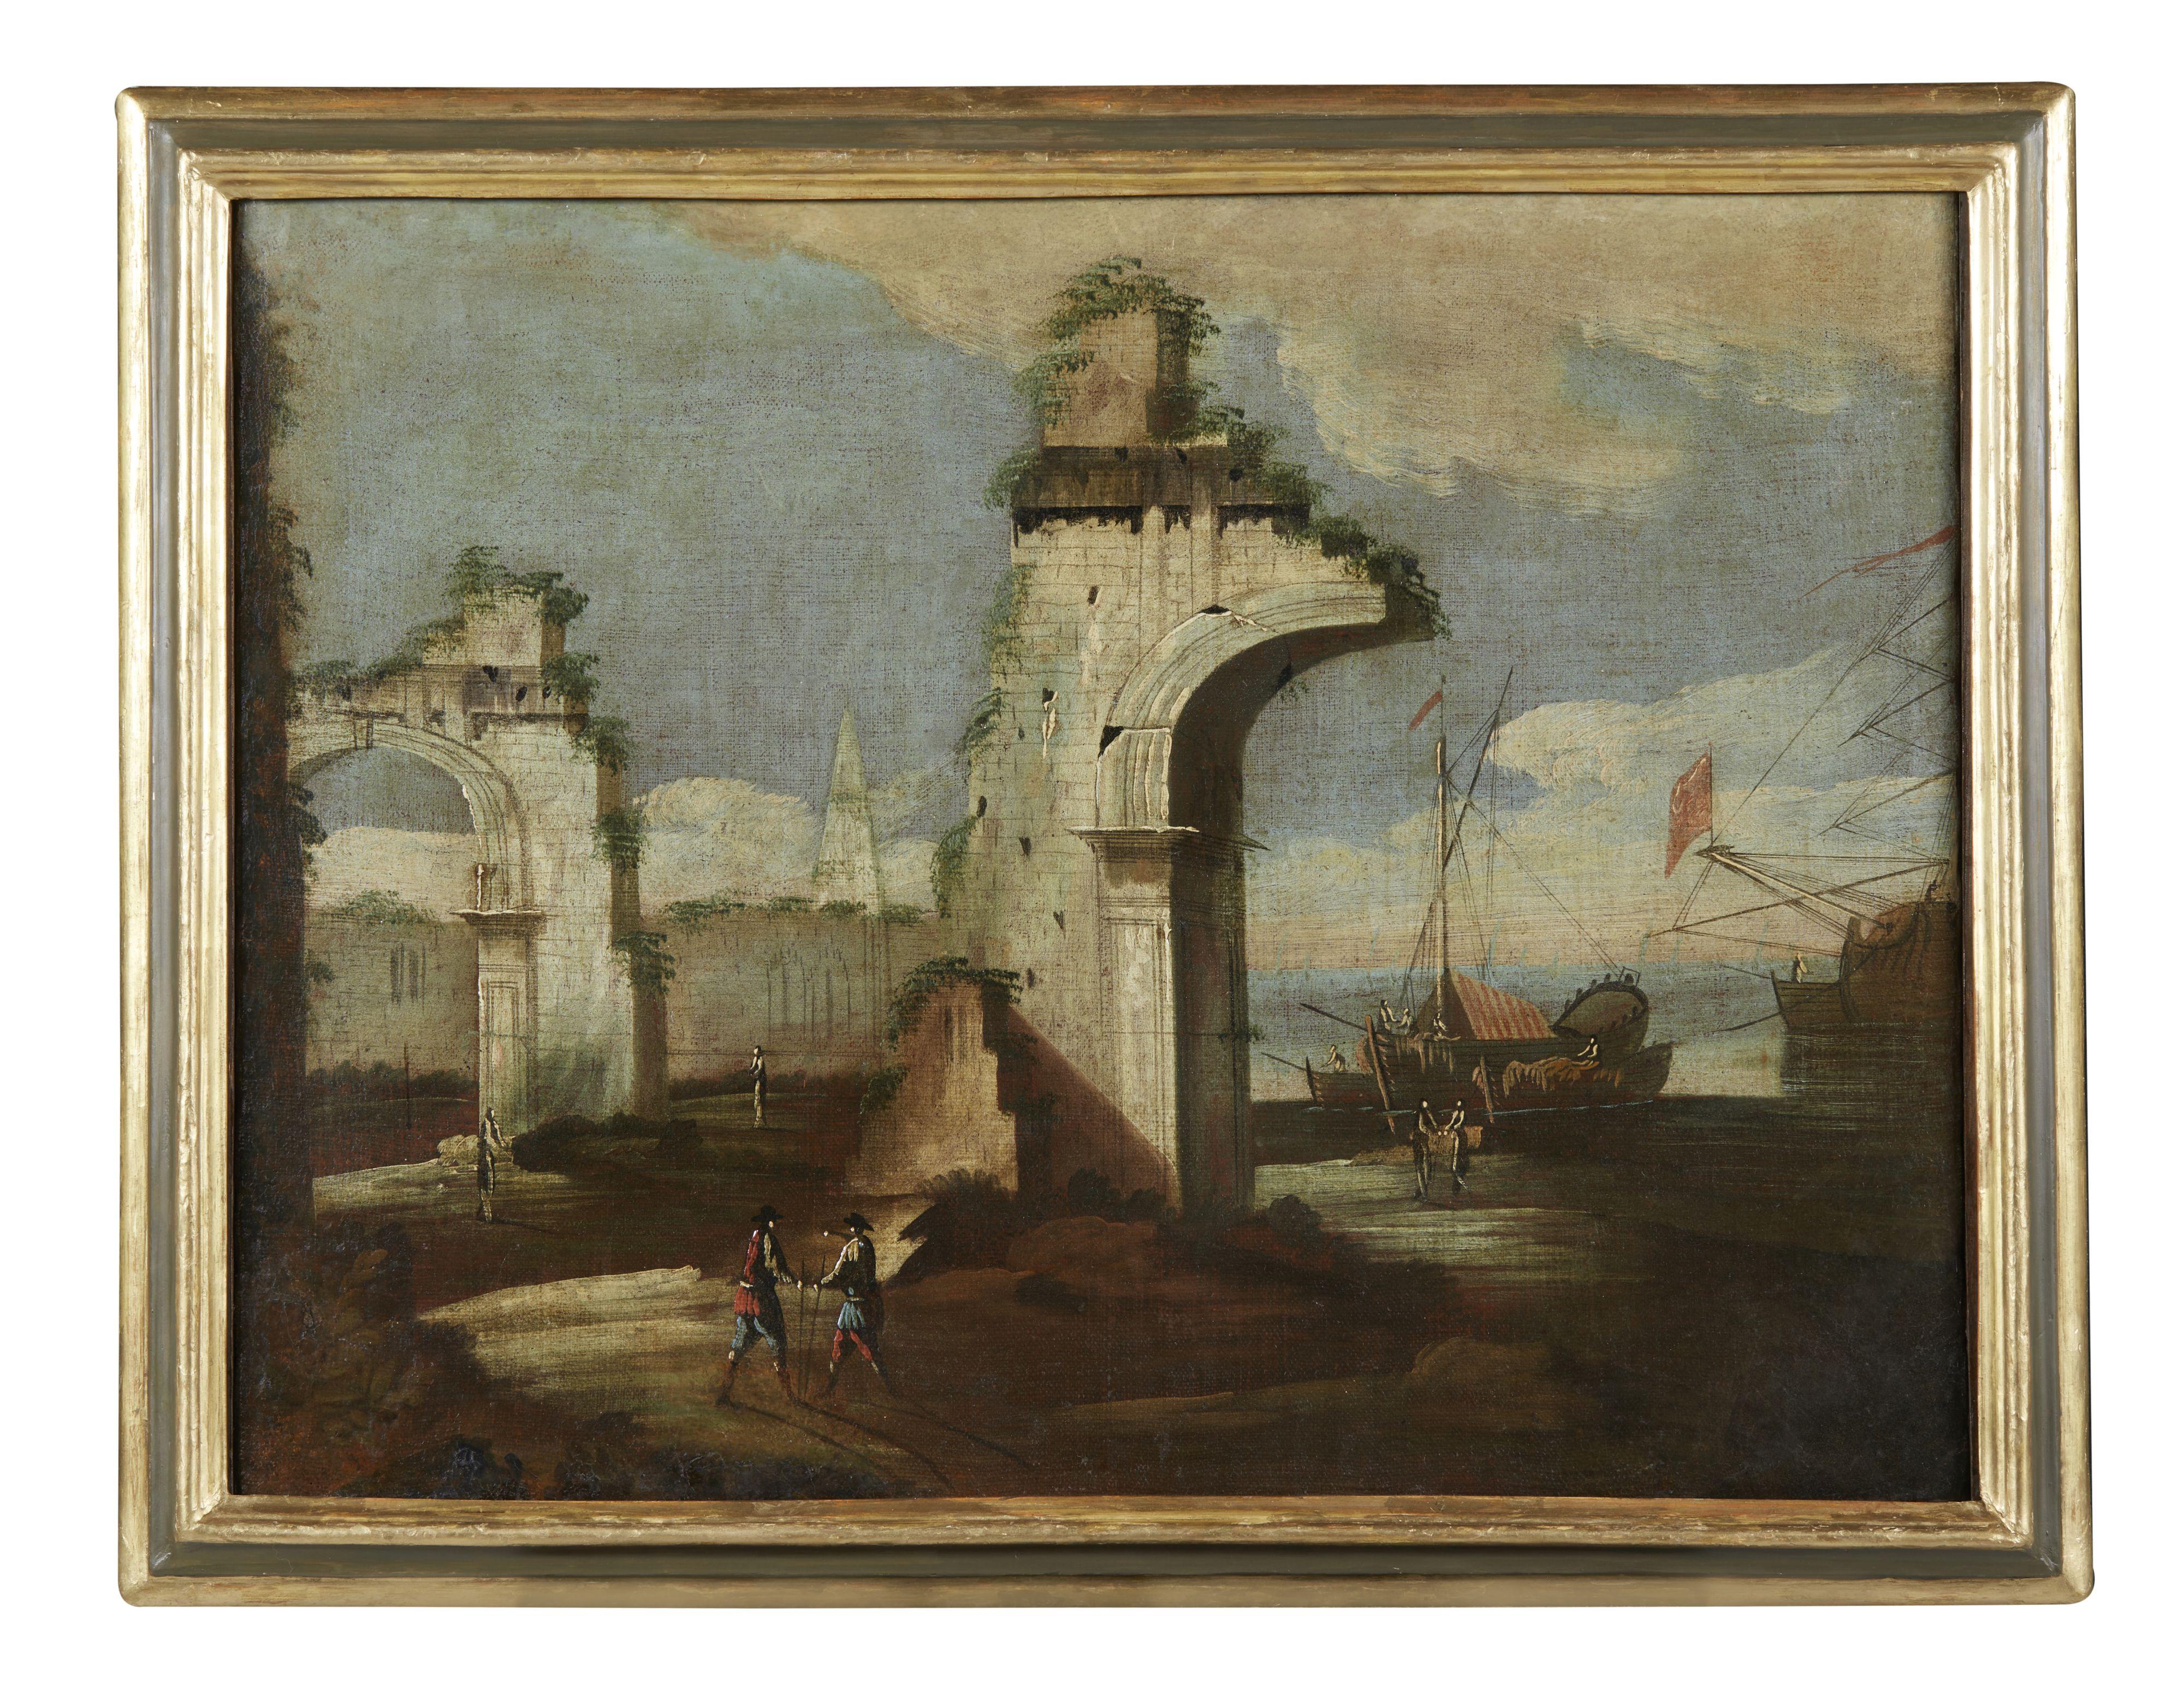 Pair of paintings, oil on canvas, measuring 55 x 72 cm without frame and 65 x 80 cm with coeval Venetian lacquered frame, depicting two fantasy landscapes by Master of Landscapes Correr (active in Venice in the second half of the 18th century) .

We